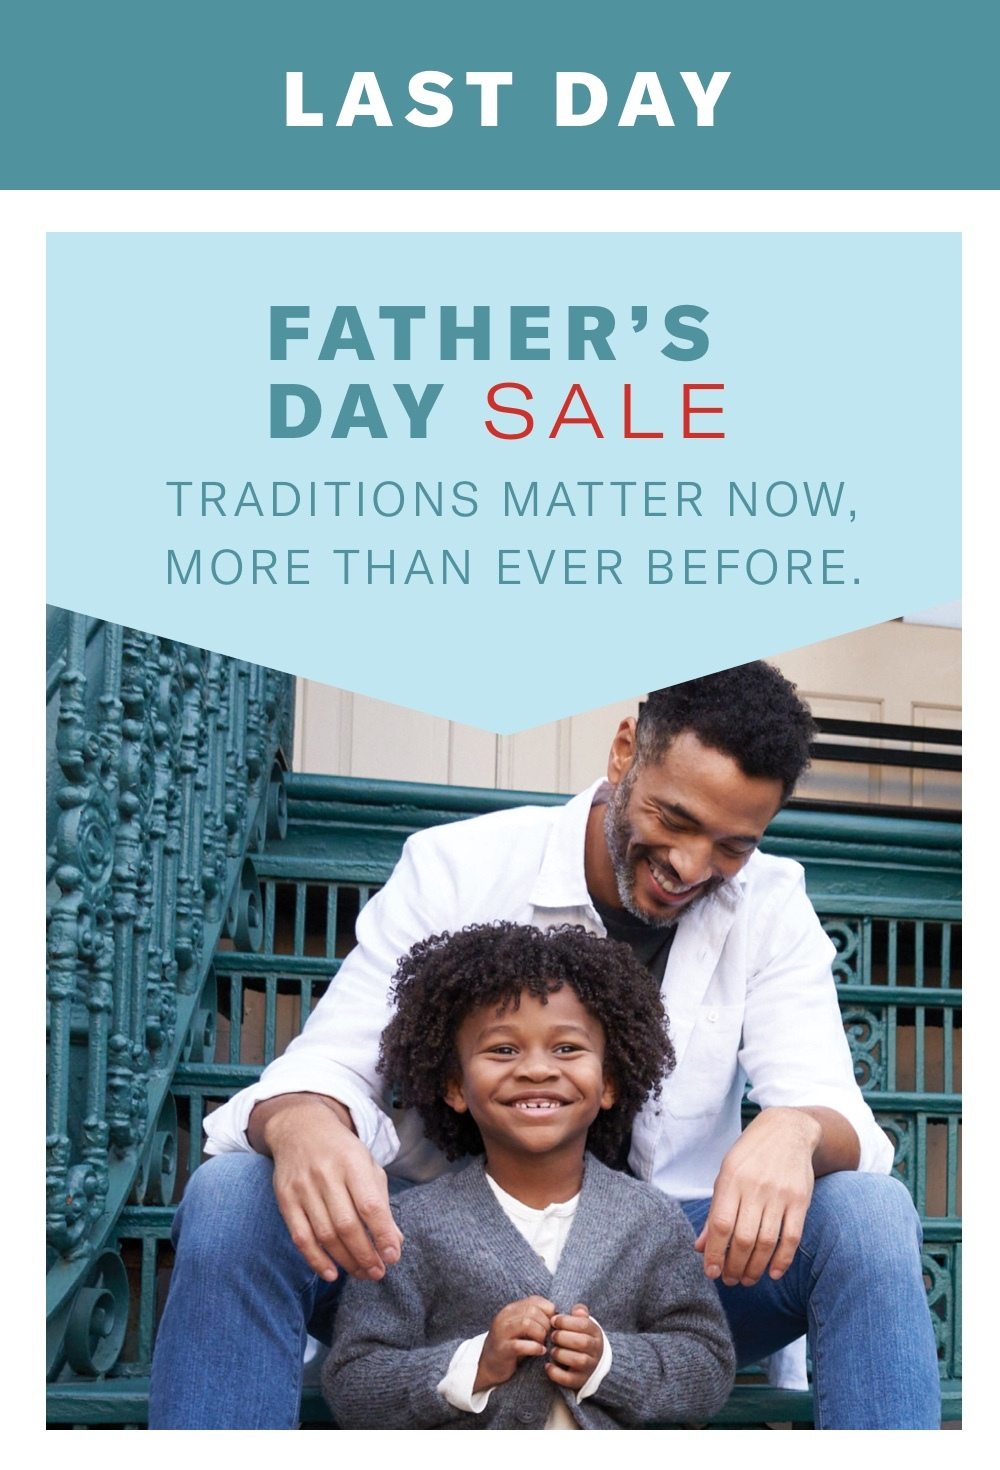 Last Day for Father's Day Sale